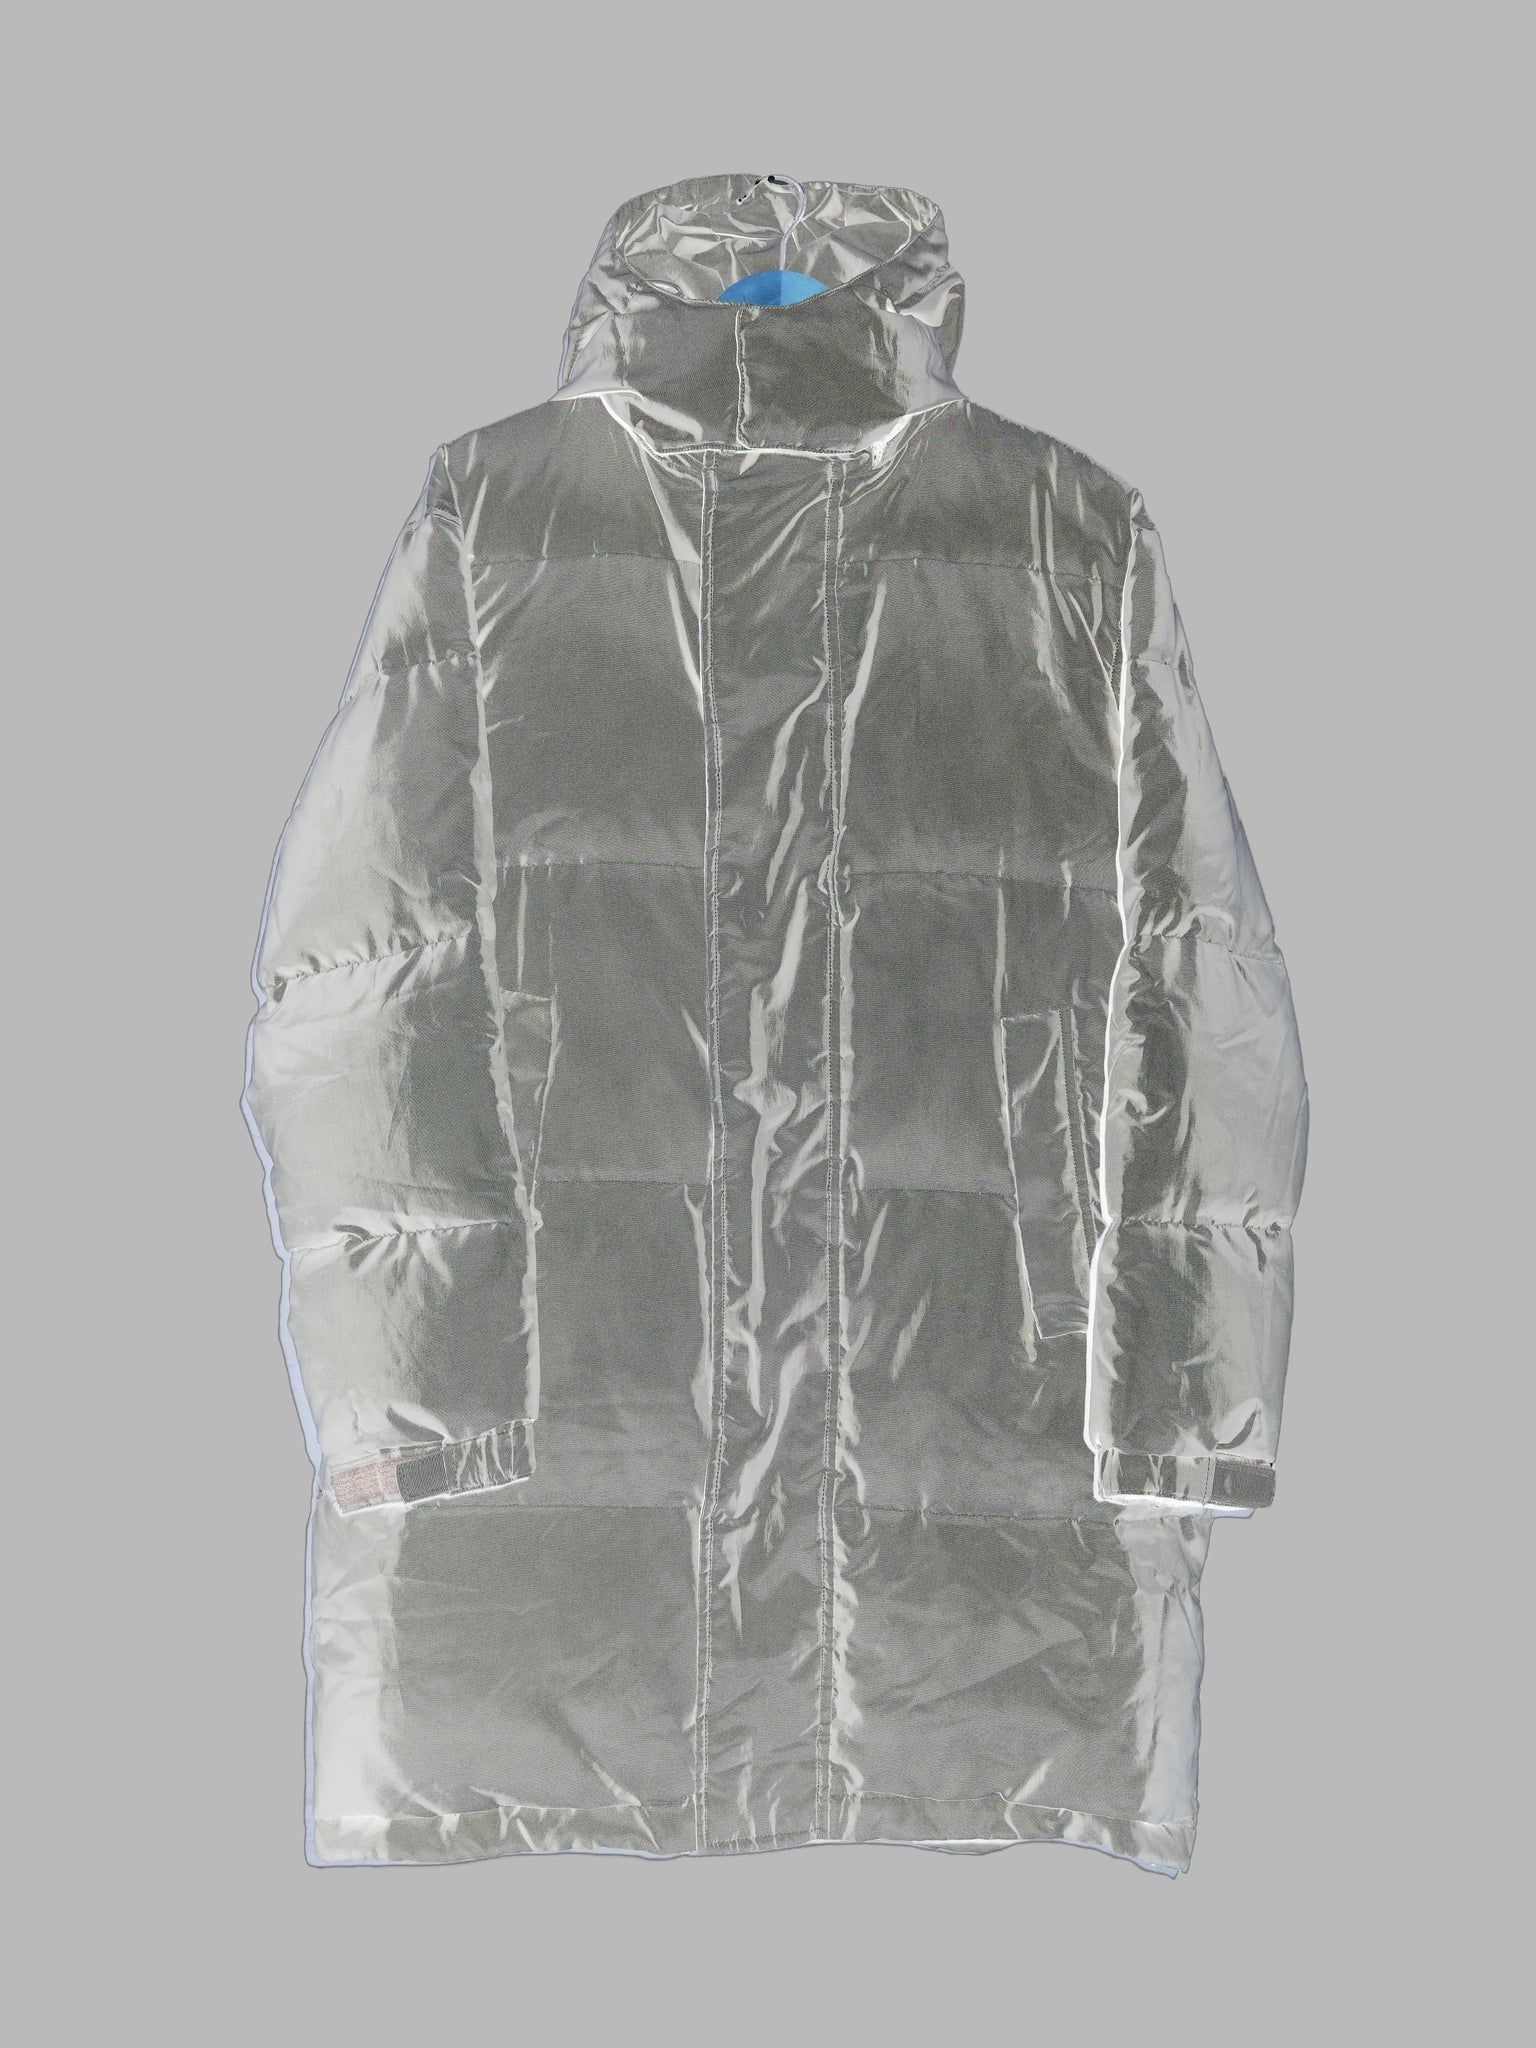 Kenzo Homme 1990s shiny silver hooded down puffer coat - size 3 L